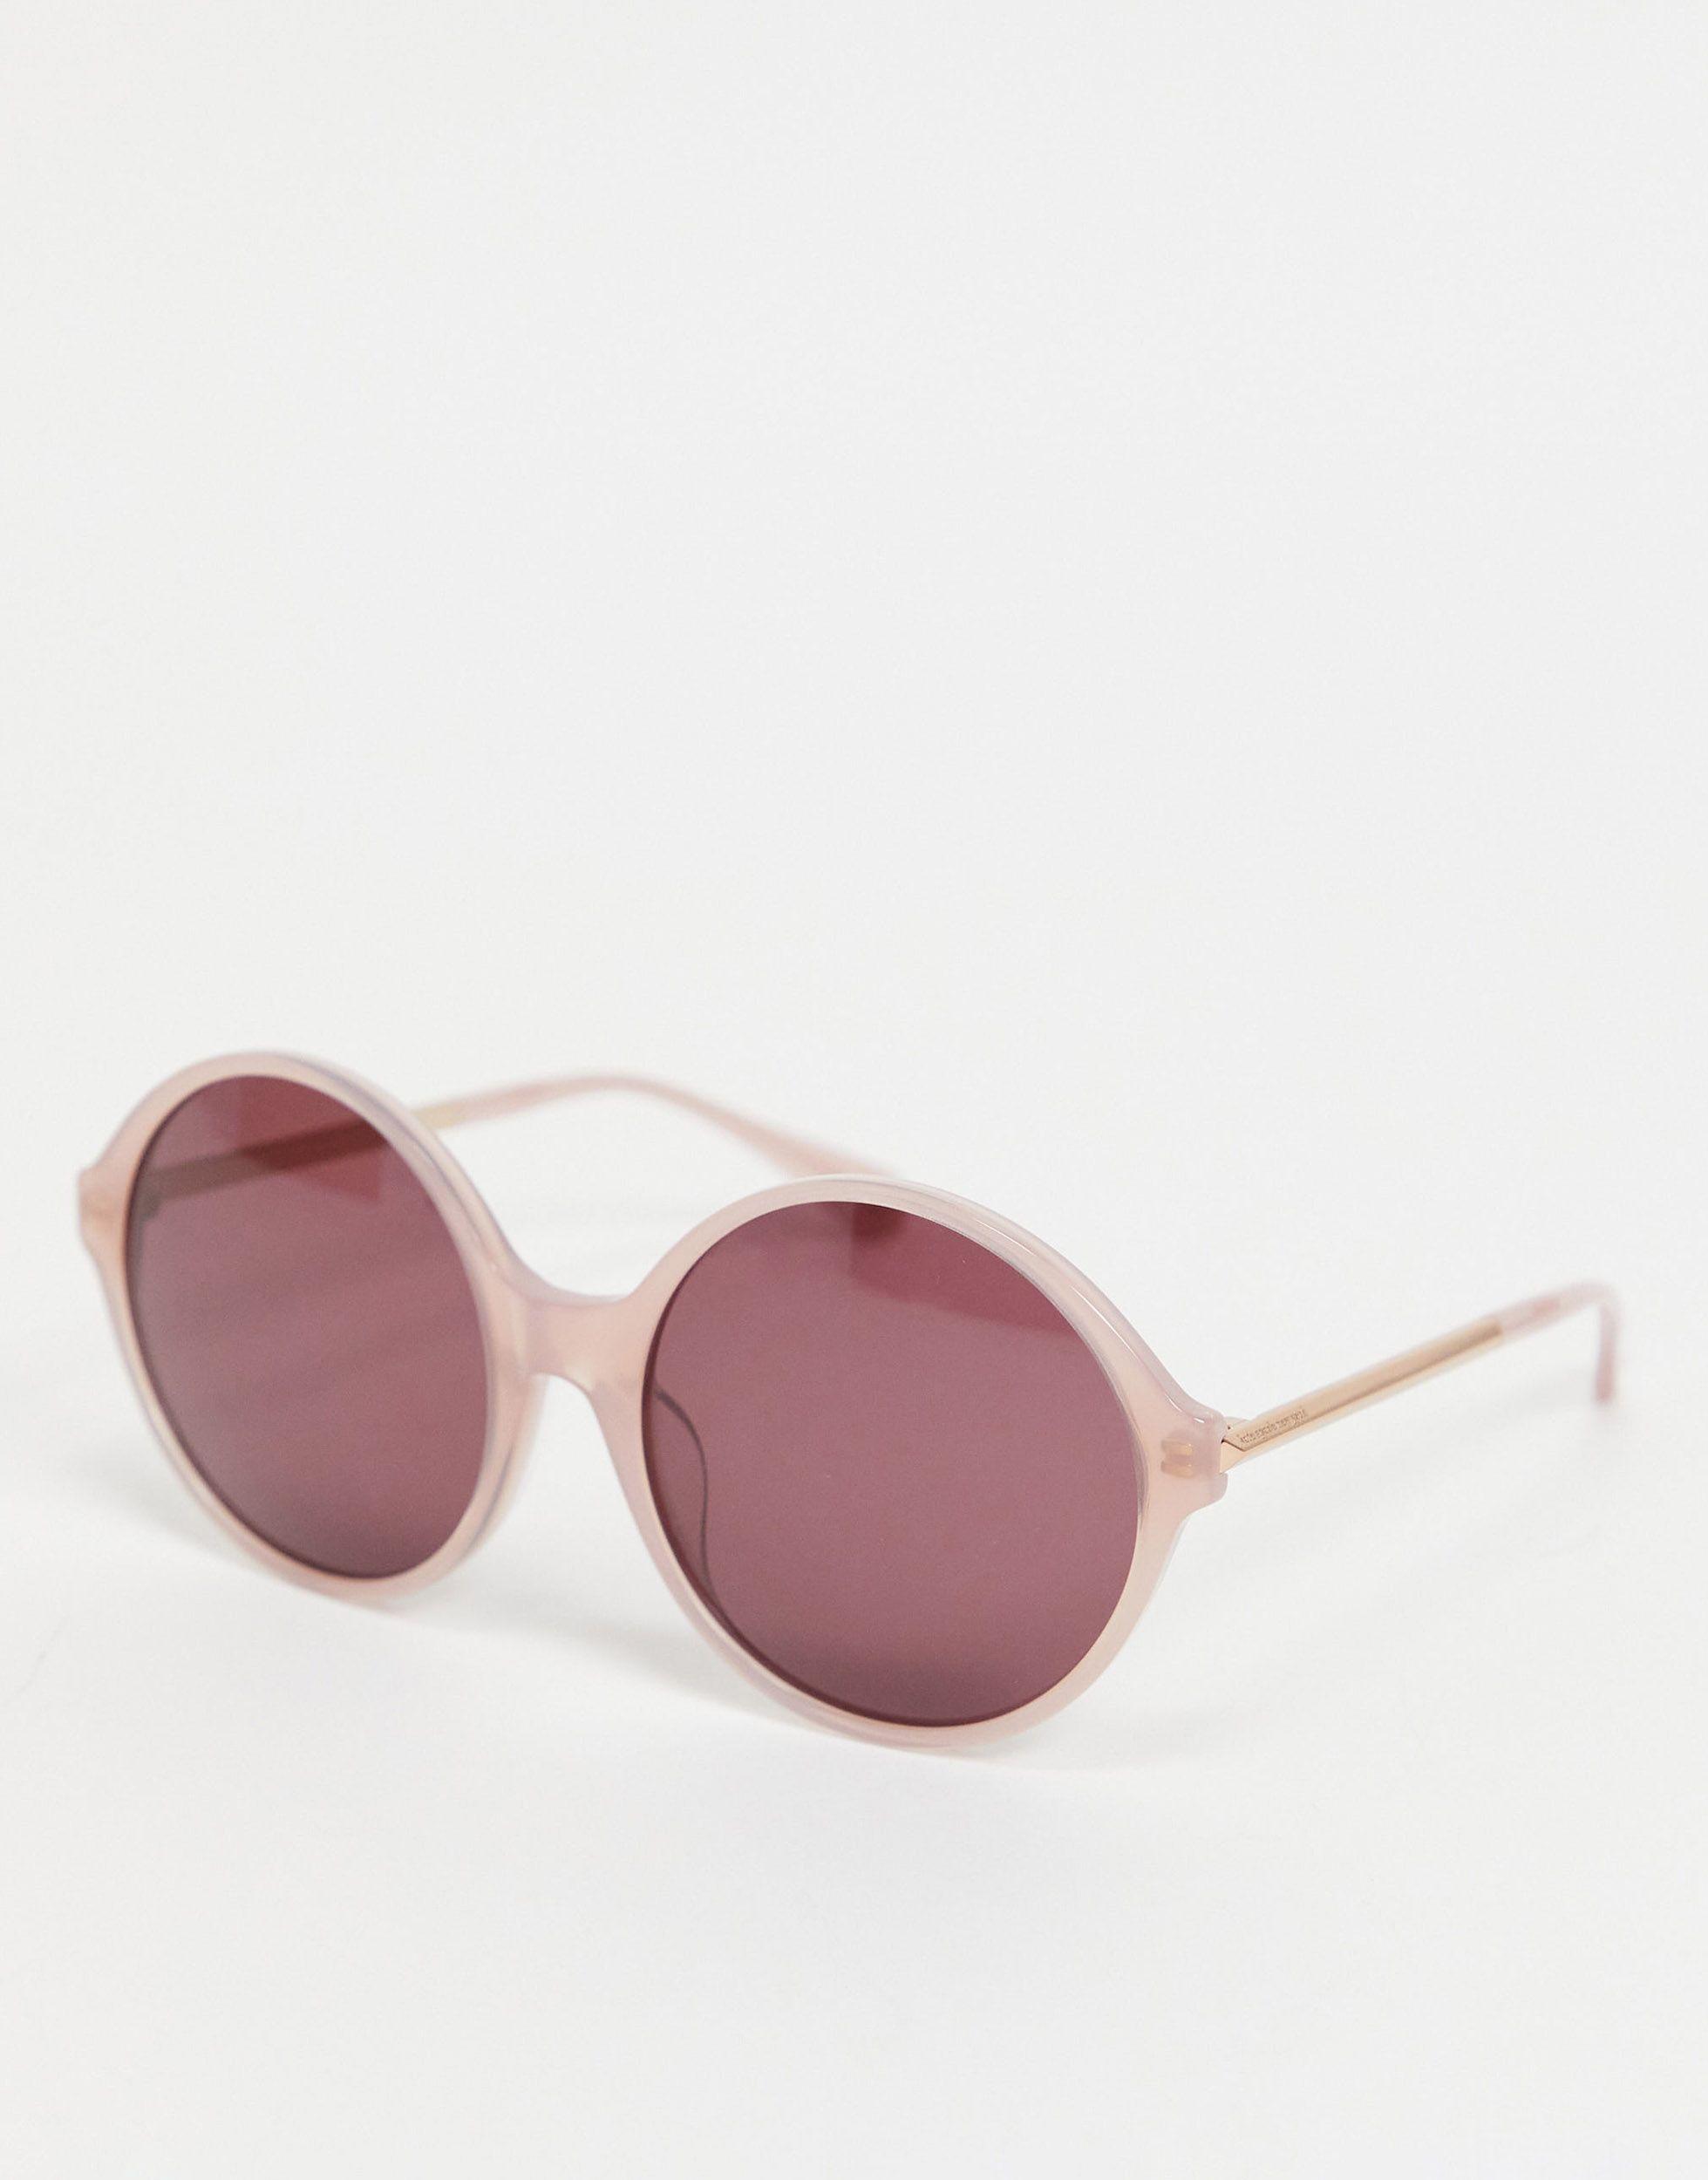 Kate Spade Wren Oversized Round Sunglasses in Pink | Lyst